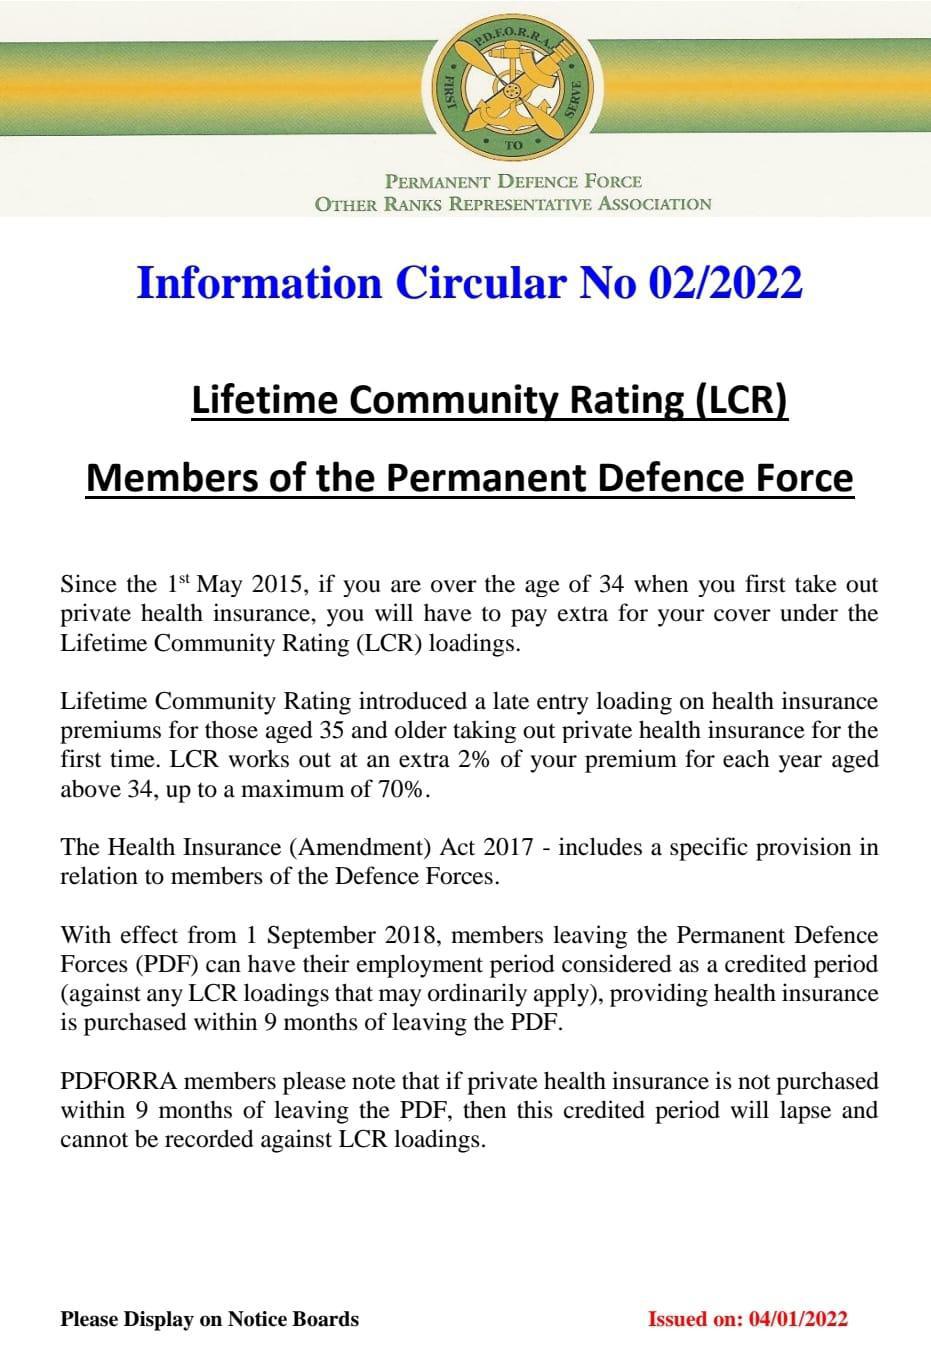 Information Circular No 02 of 22 - Lifetime Community Rating members of the Defence Forces